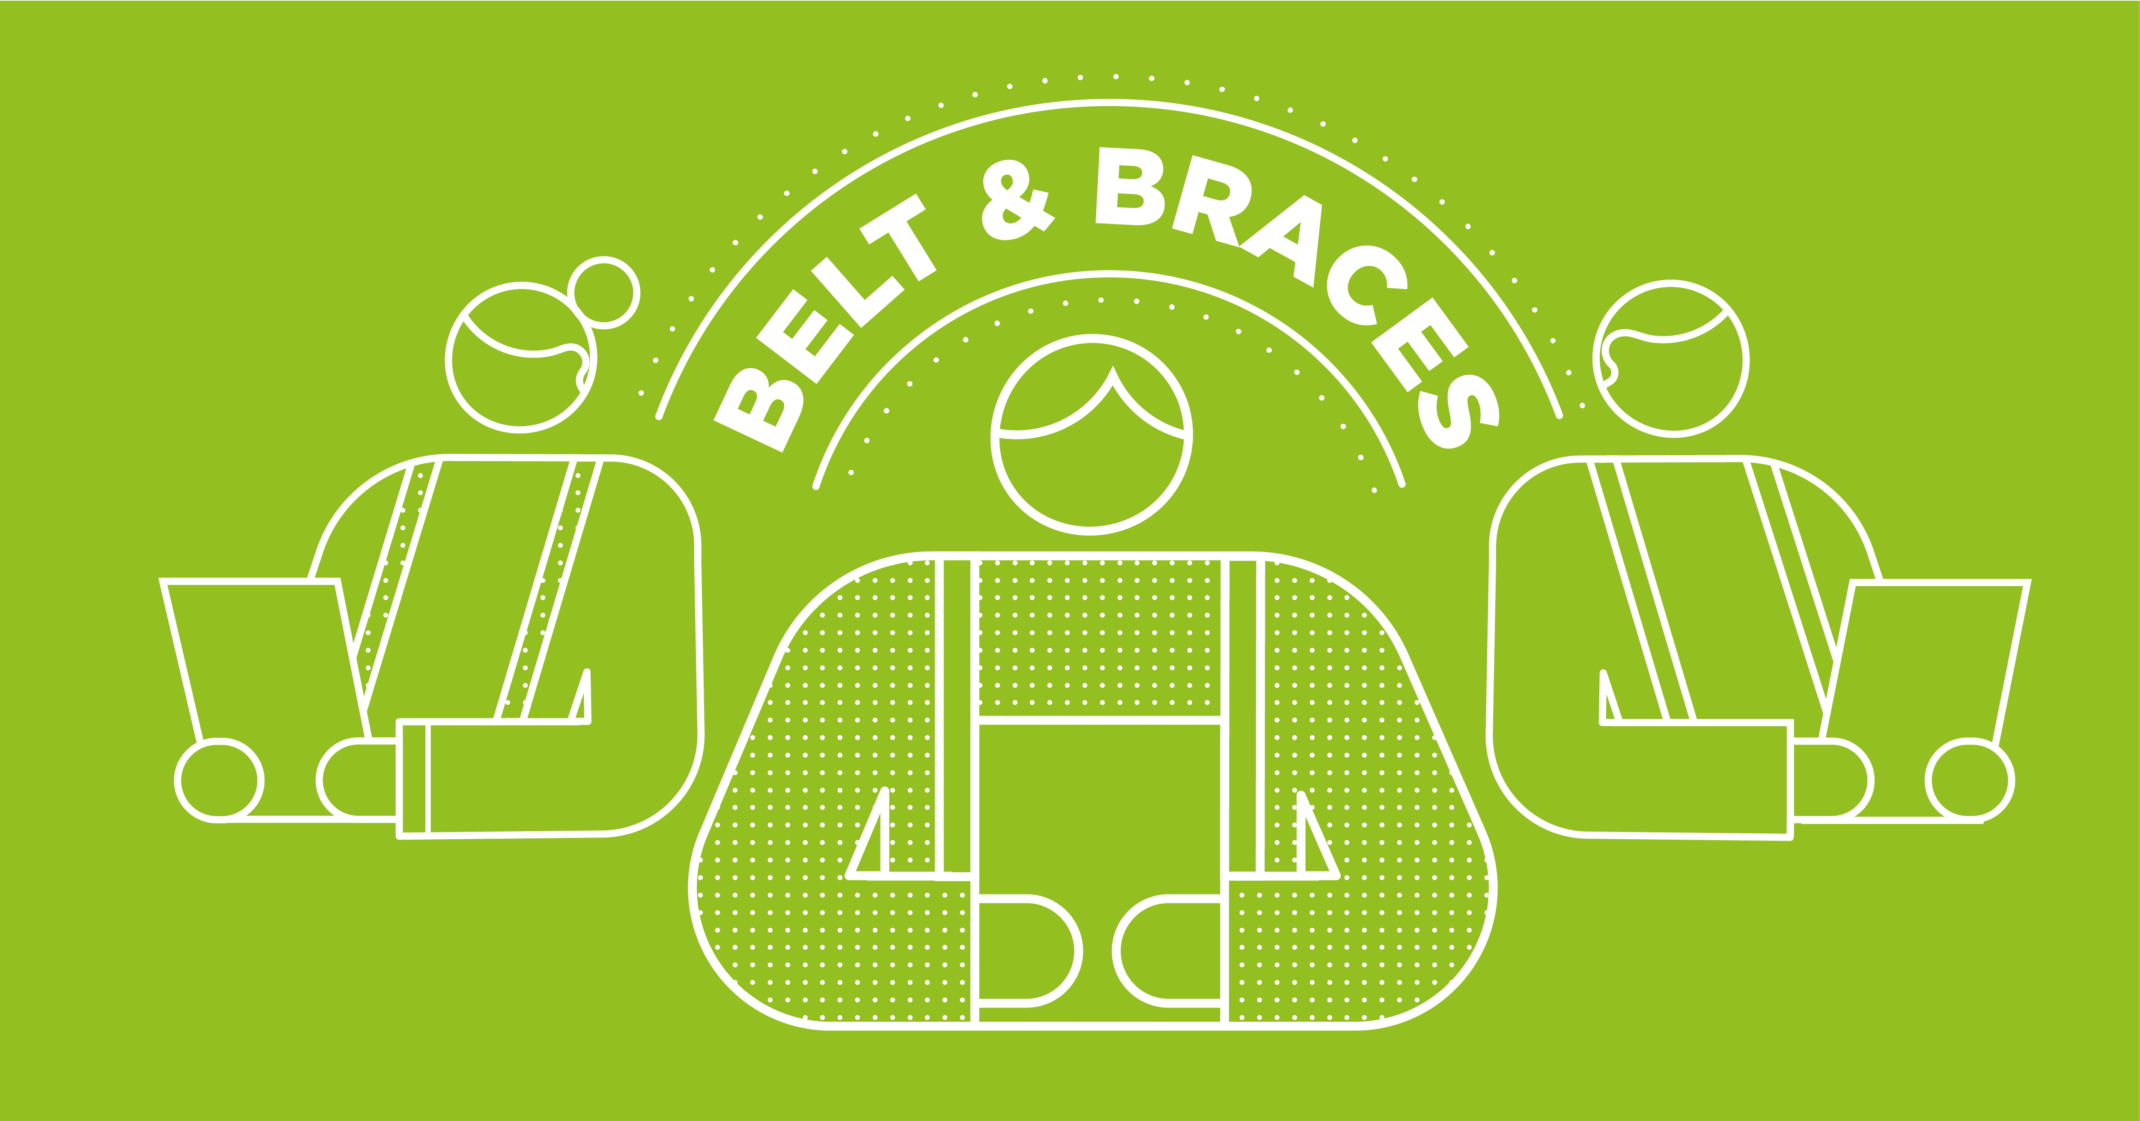 Belts and Braces